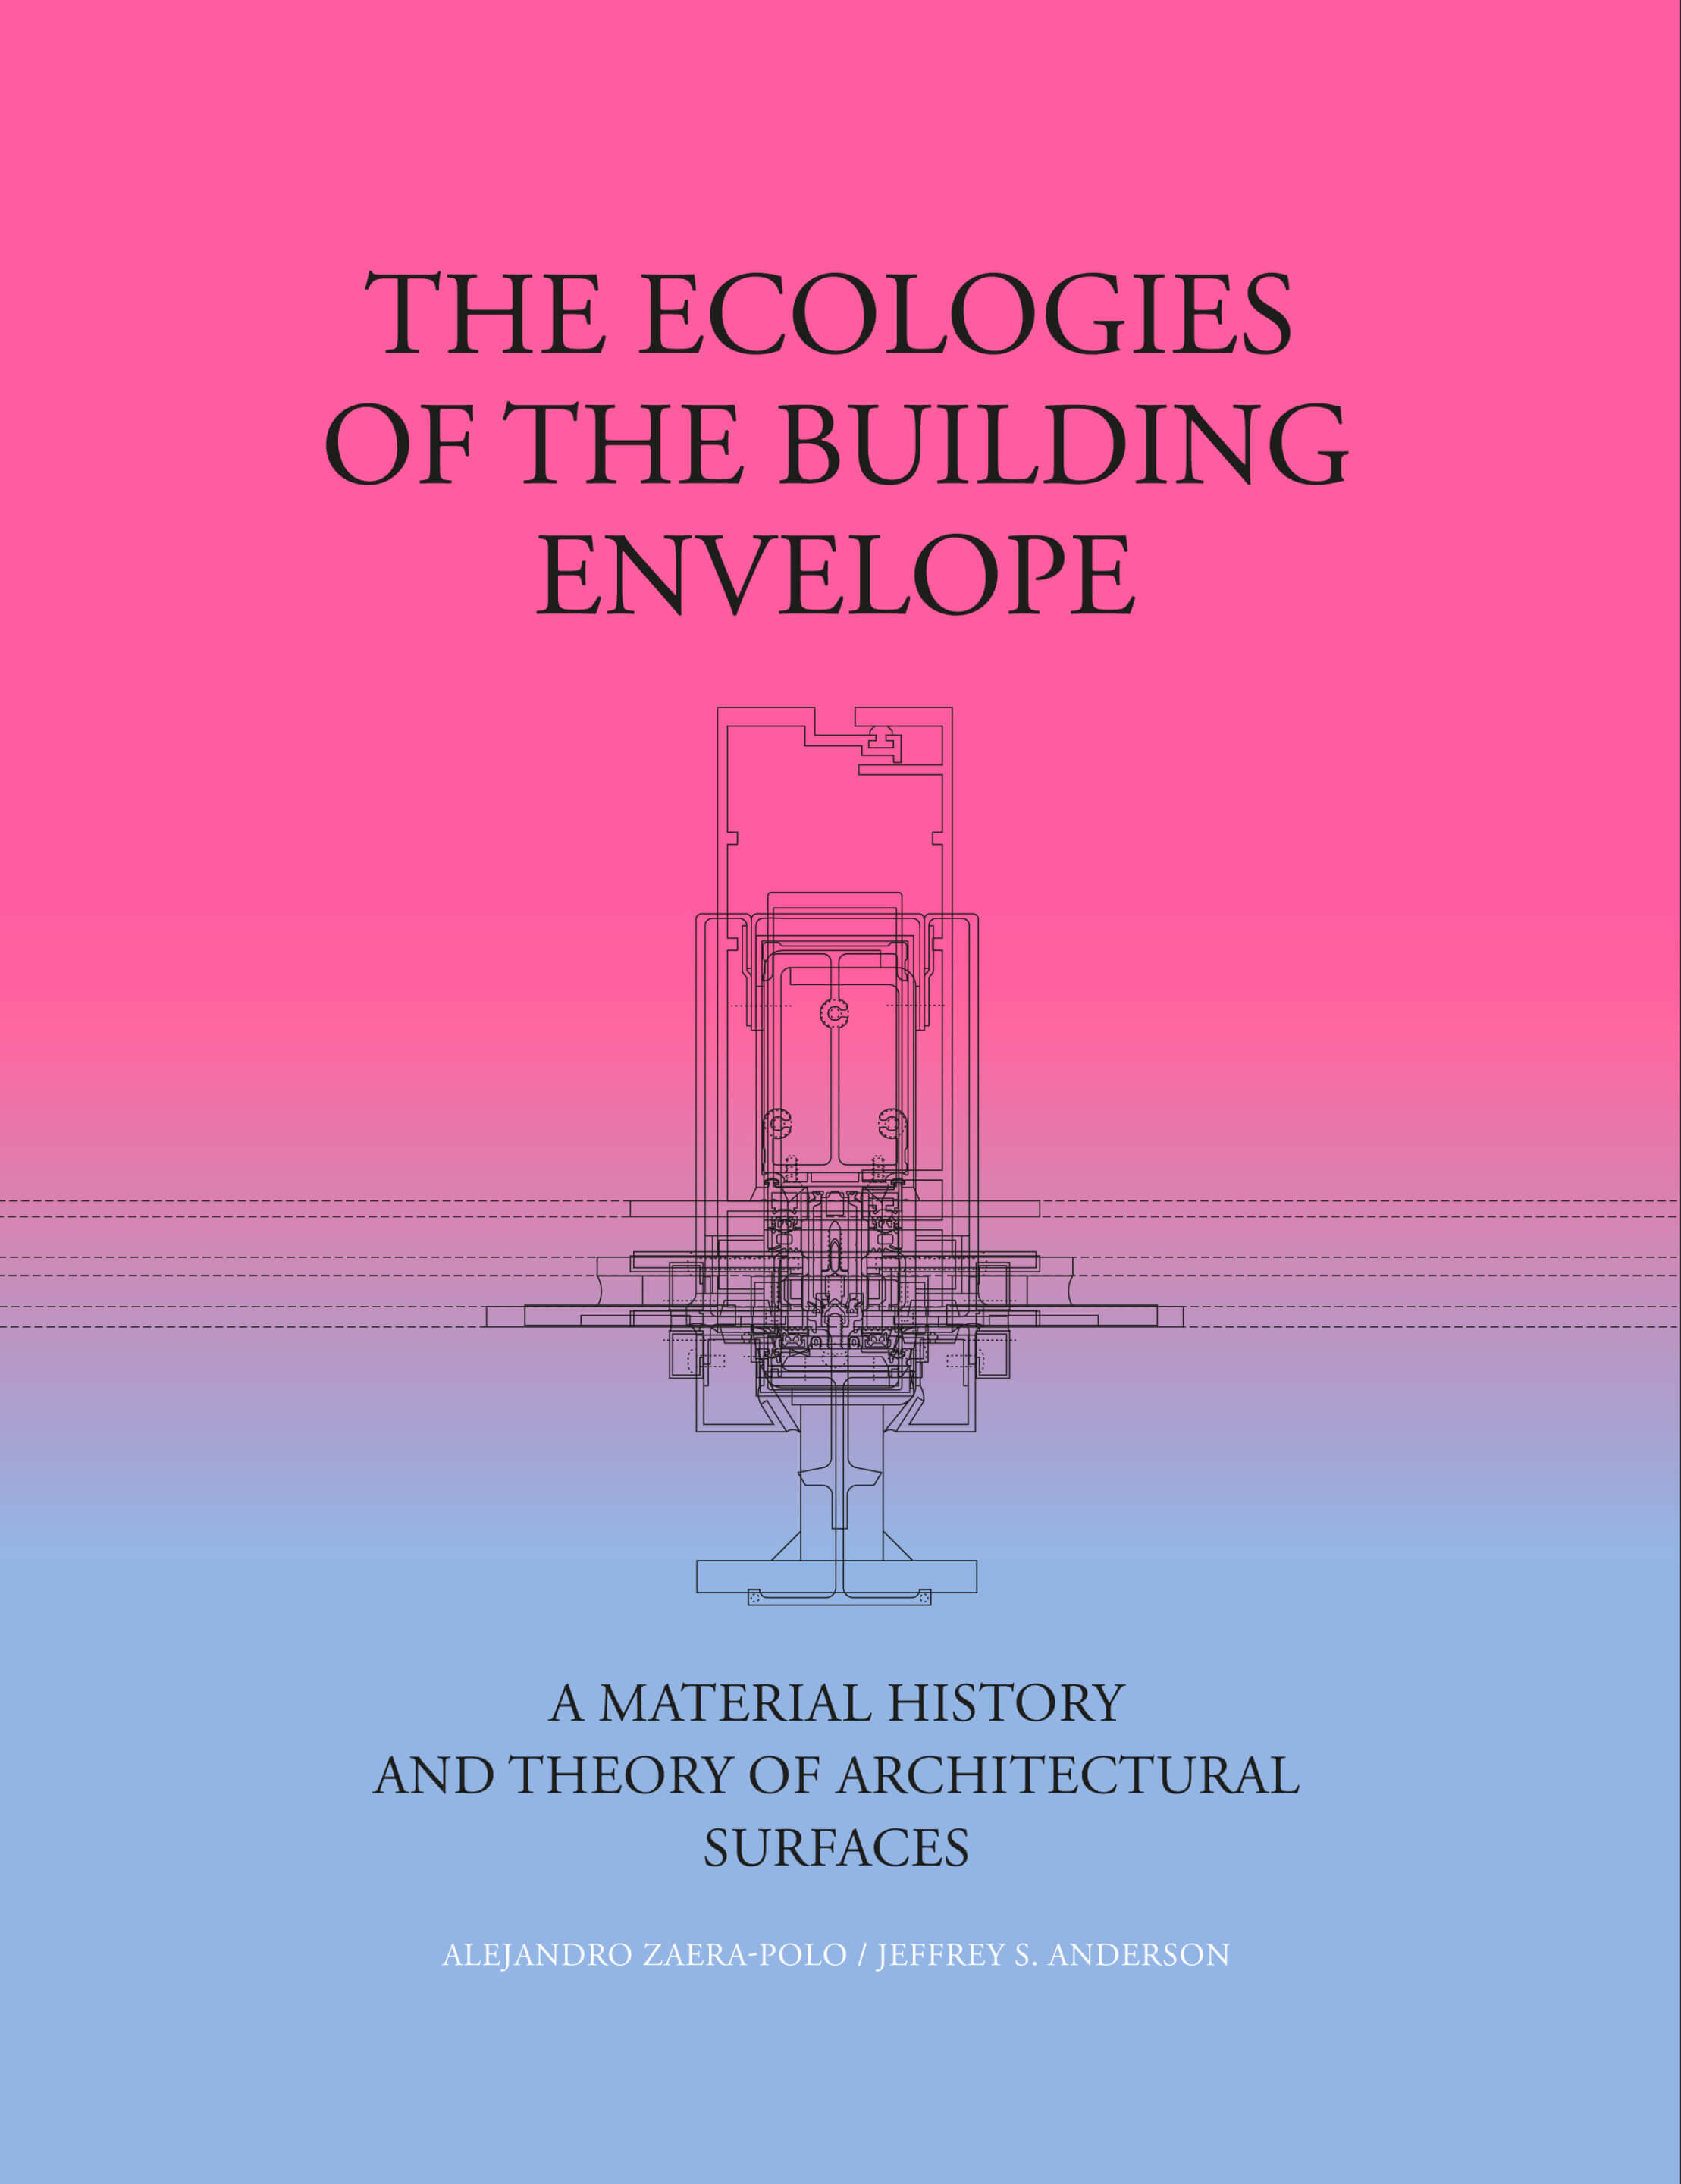 book cover for ecologies of the building envelope